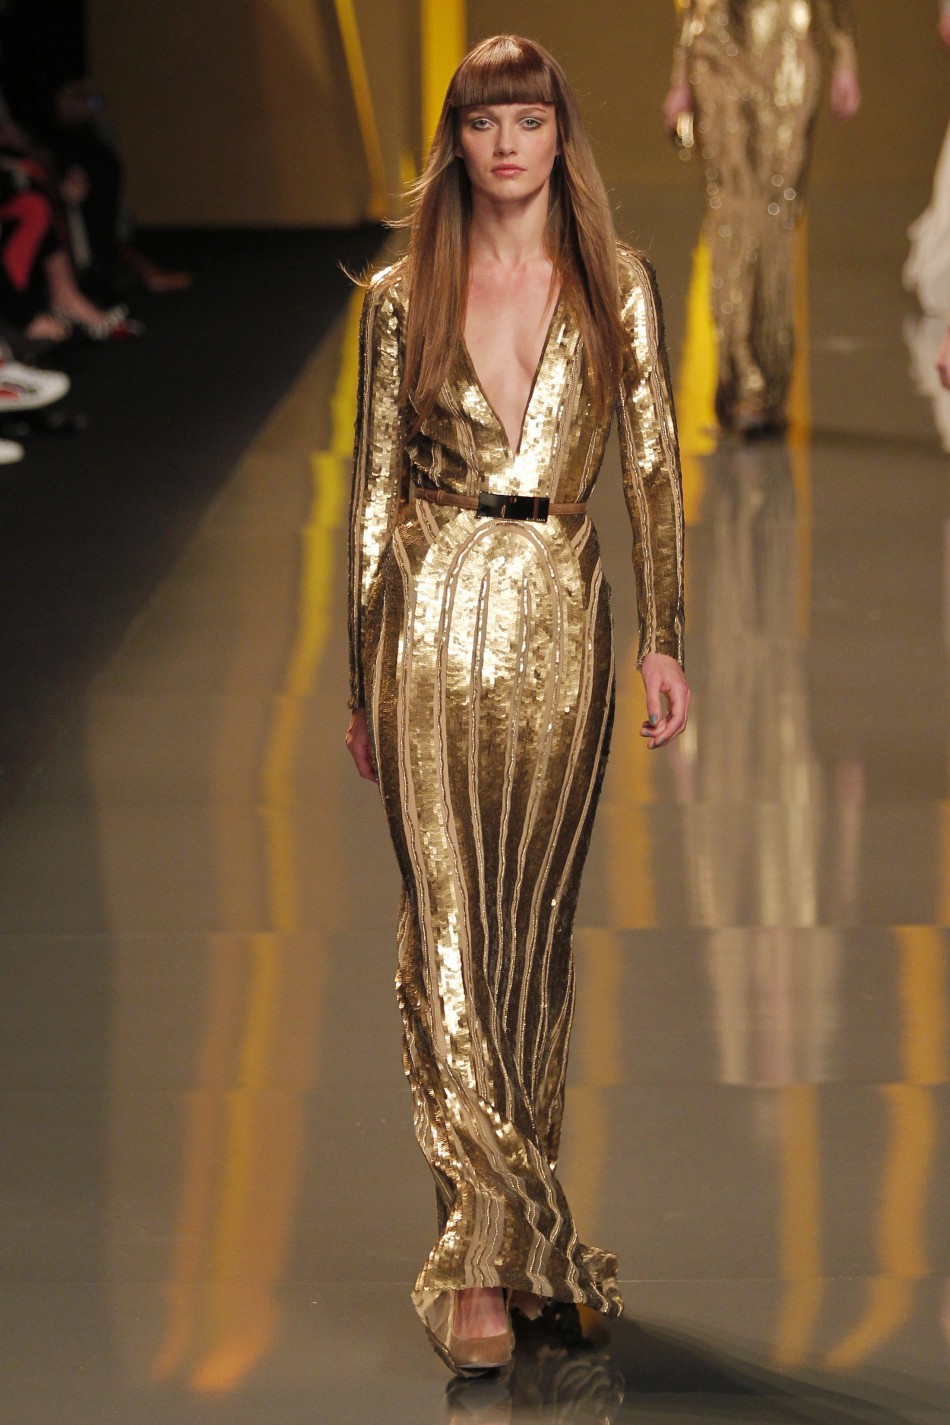 Elie Saabs Ultra Glam and Opulent Red-Carpet Creations at Paris Fashion Week